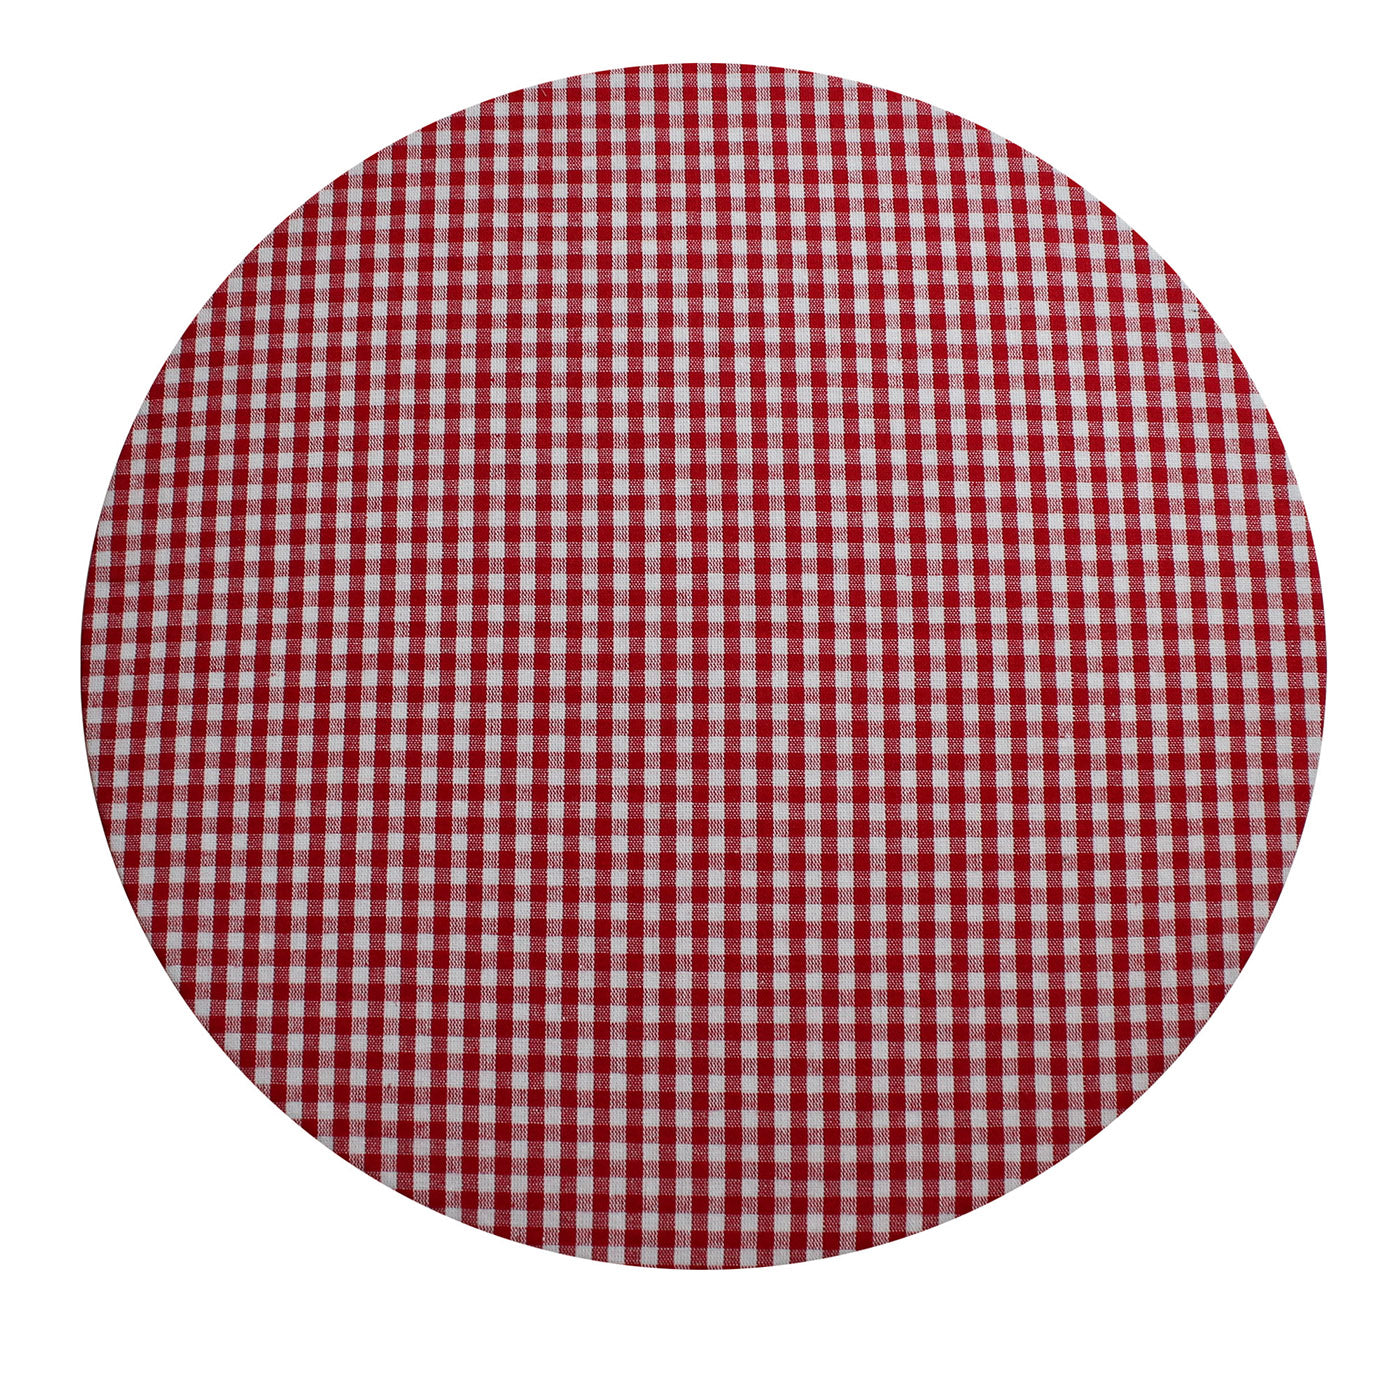 Cuffiette Check Round Red & White Placemat #2 - Main view